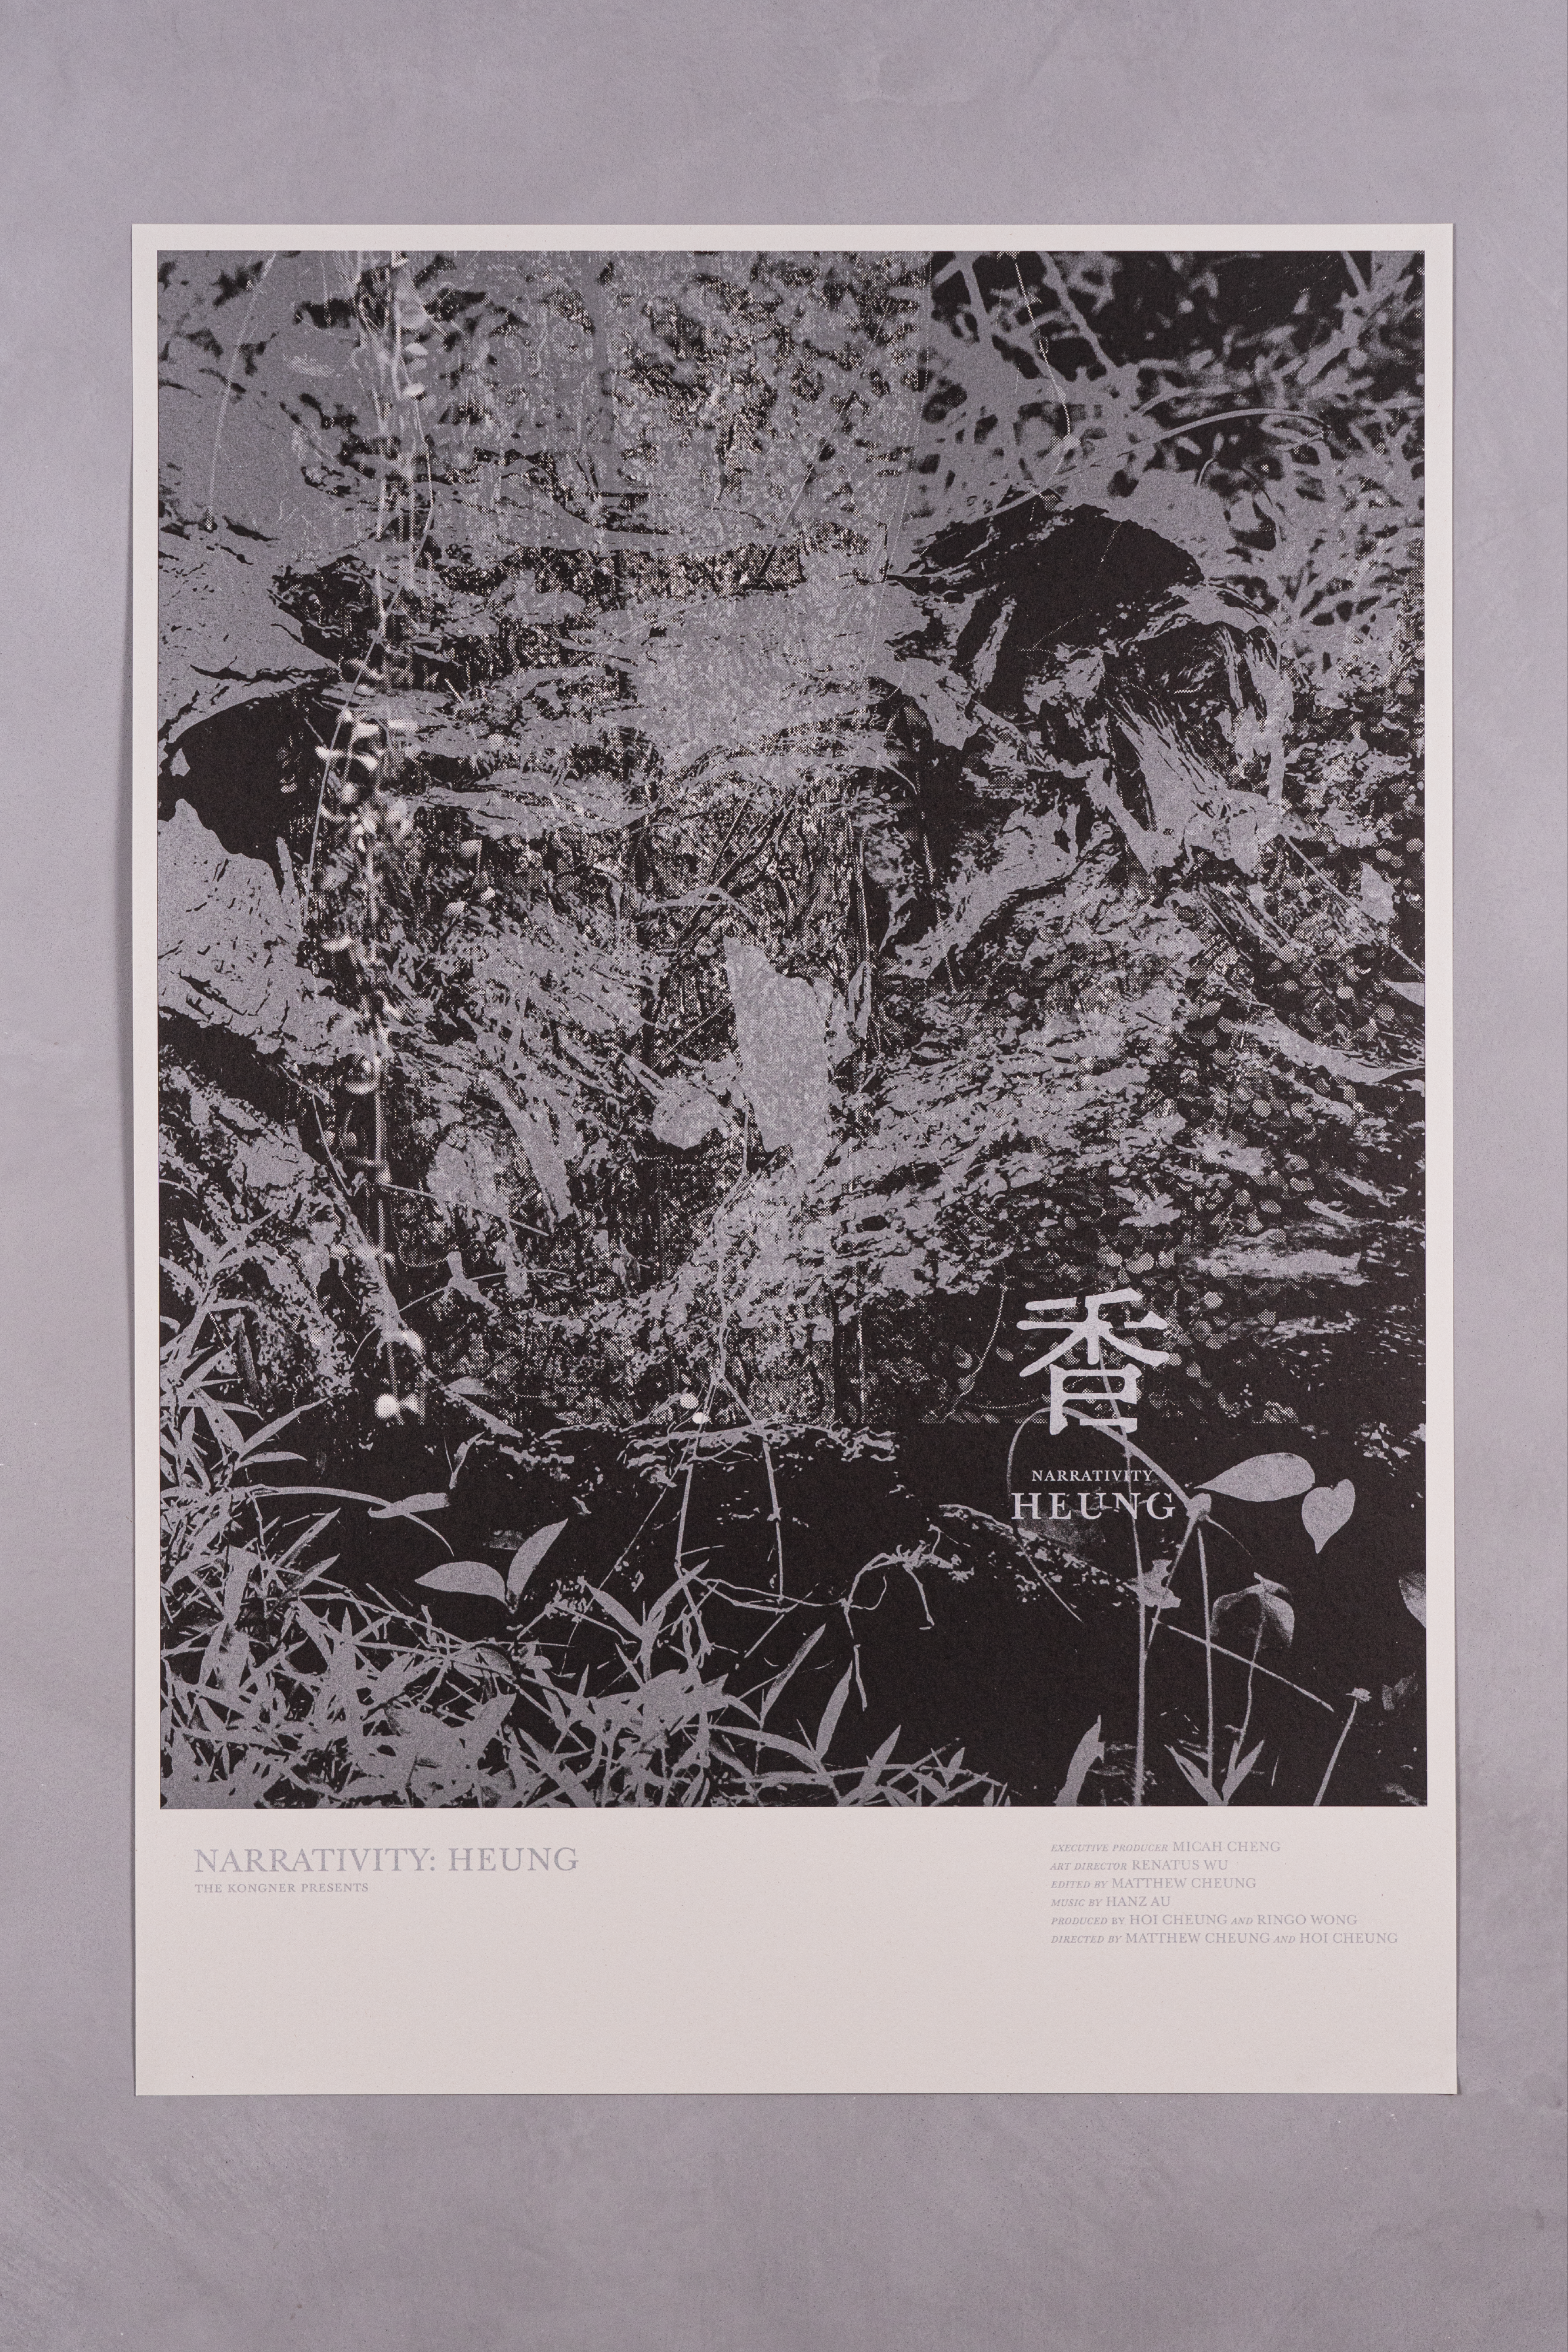 “THE KONGNER DOCUMENTARY NARRATIVITY: 香 HEUNG” Limited-edition Poster